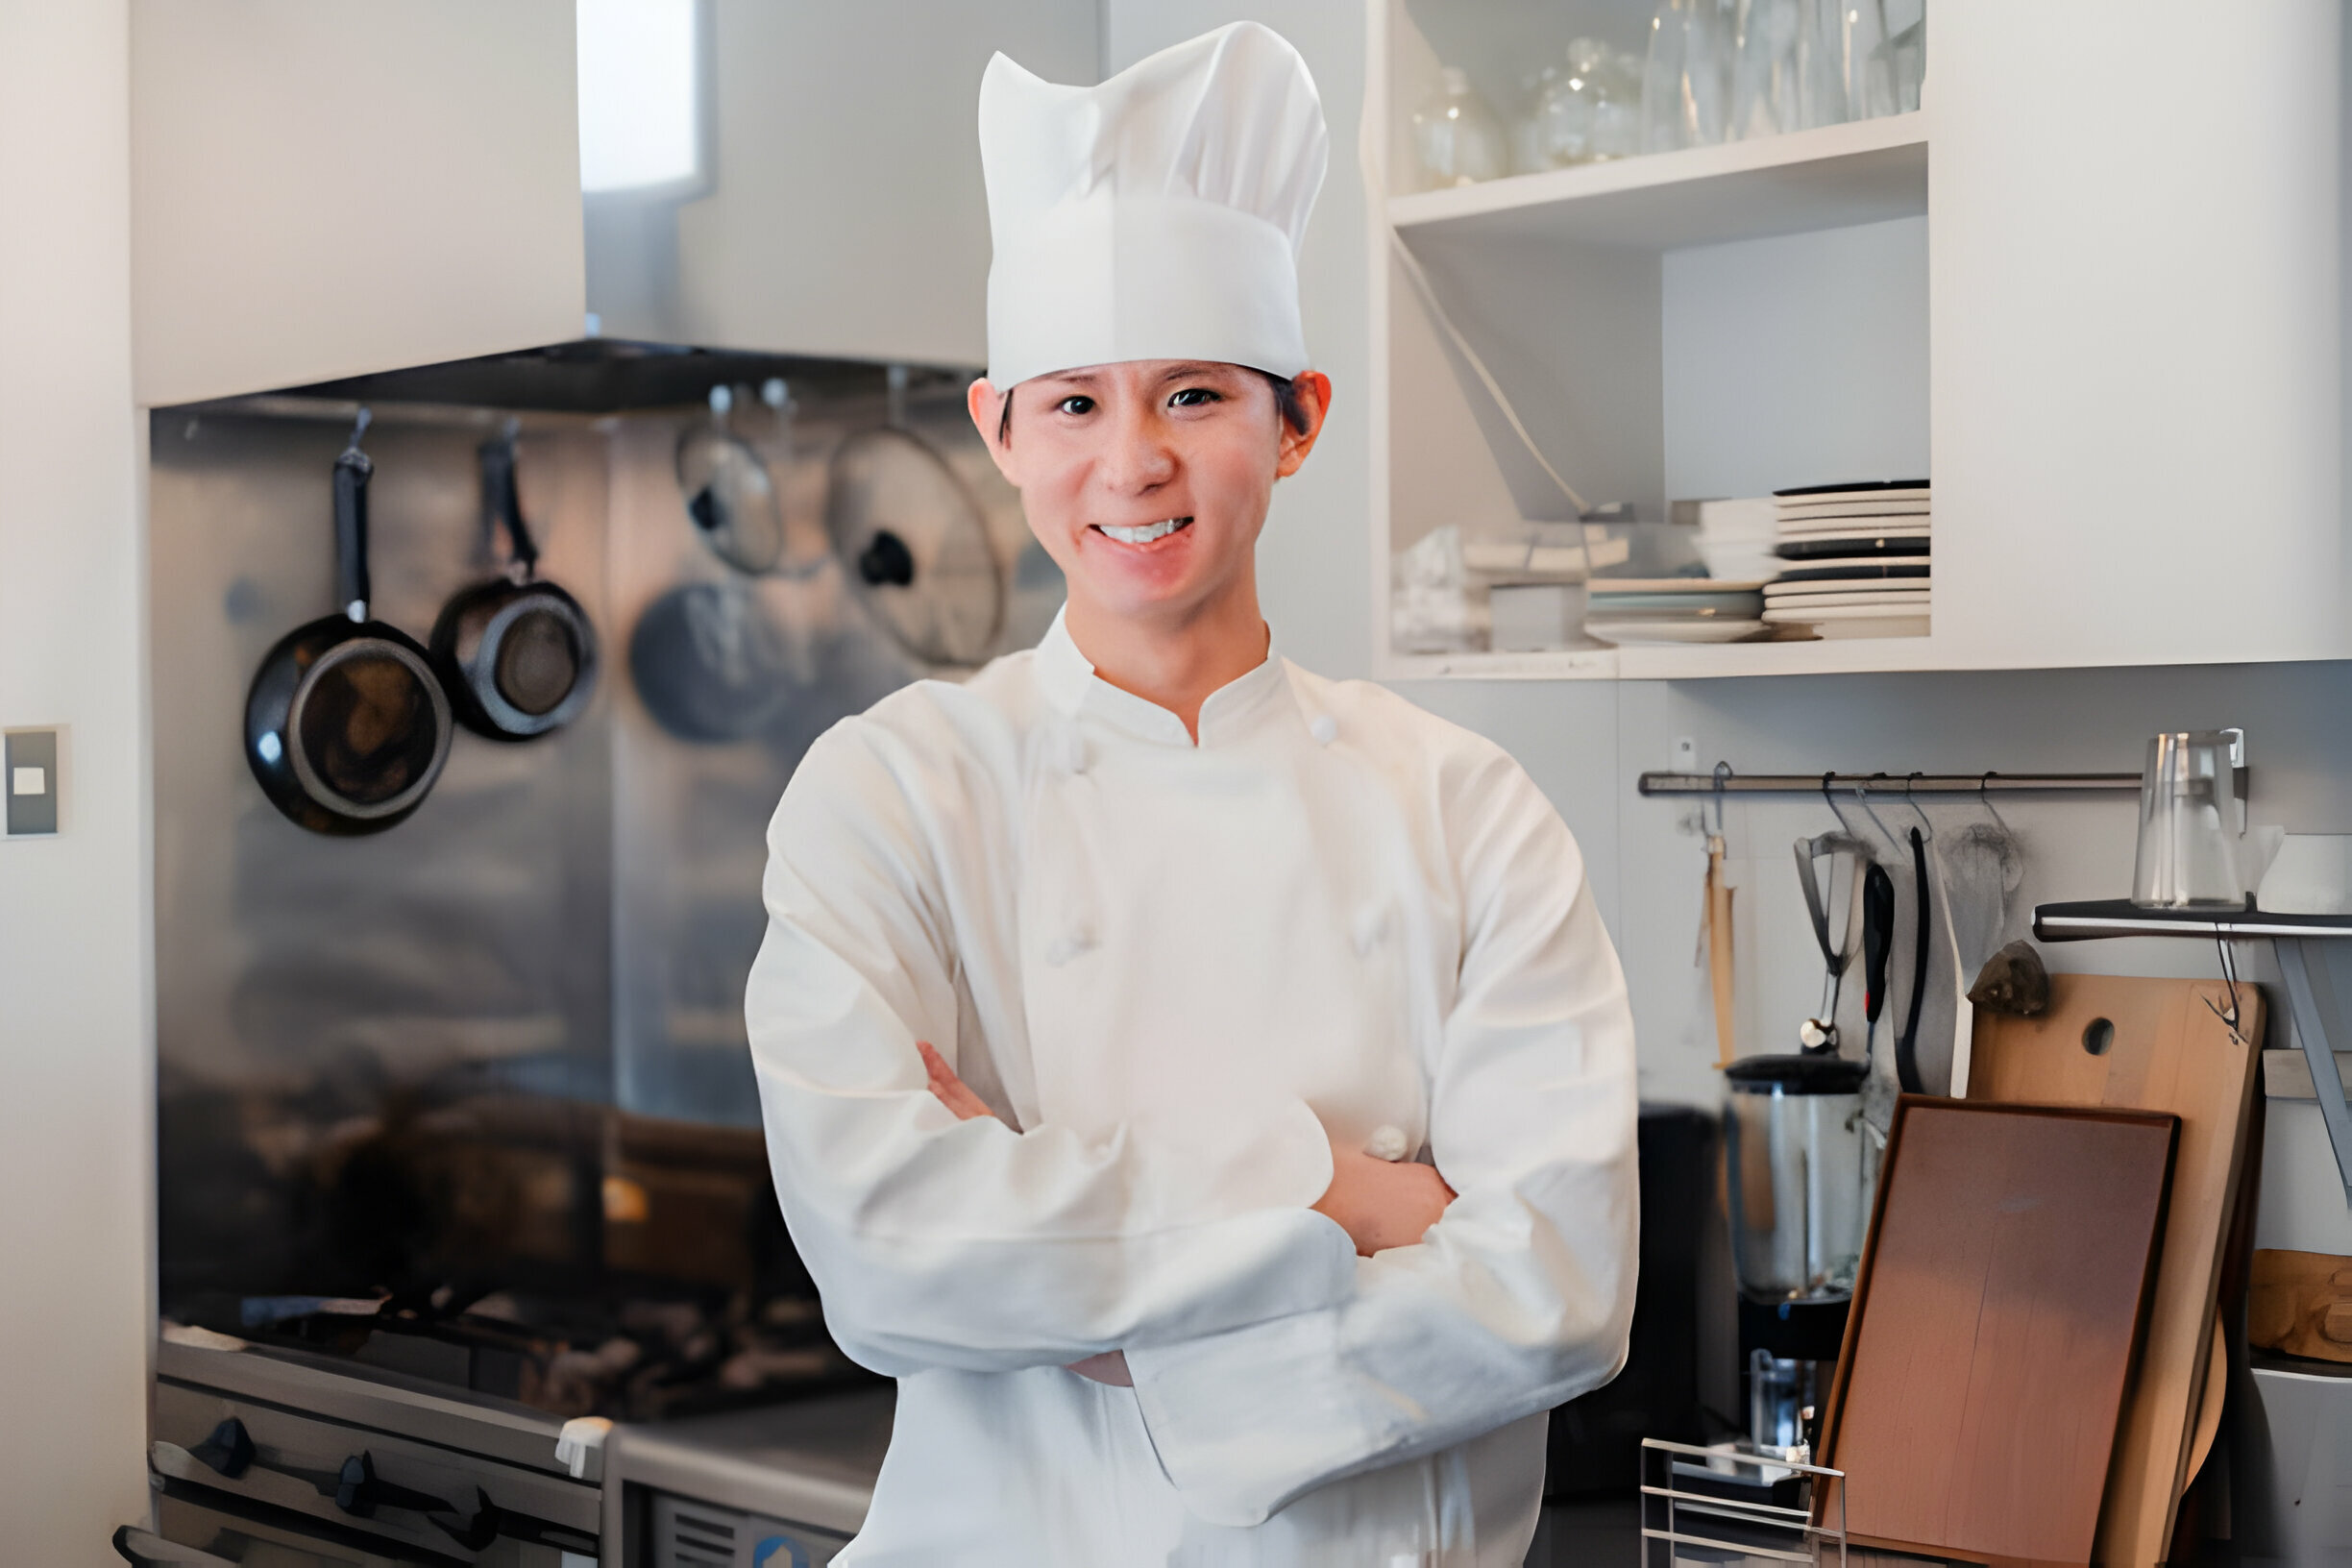 Apply for Line Cook Jobs in Canada Today with Visa Sponsorships